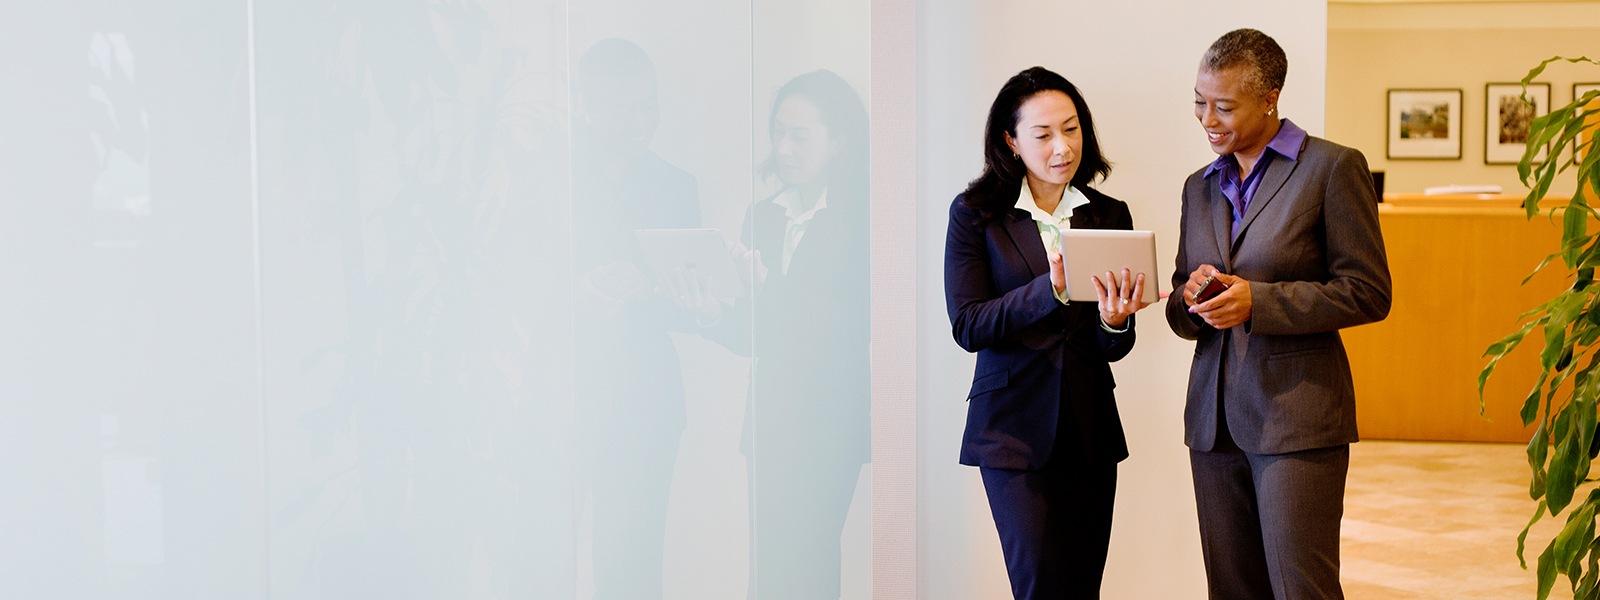 Two businesswomen dressed in suits are using a digital tablet while chatting in an office corridor.